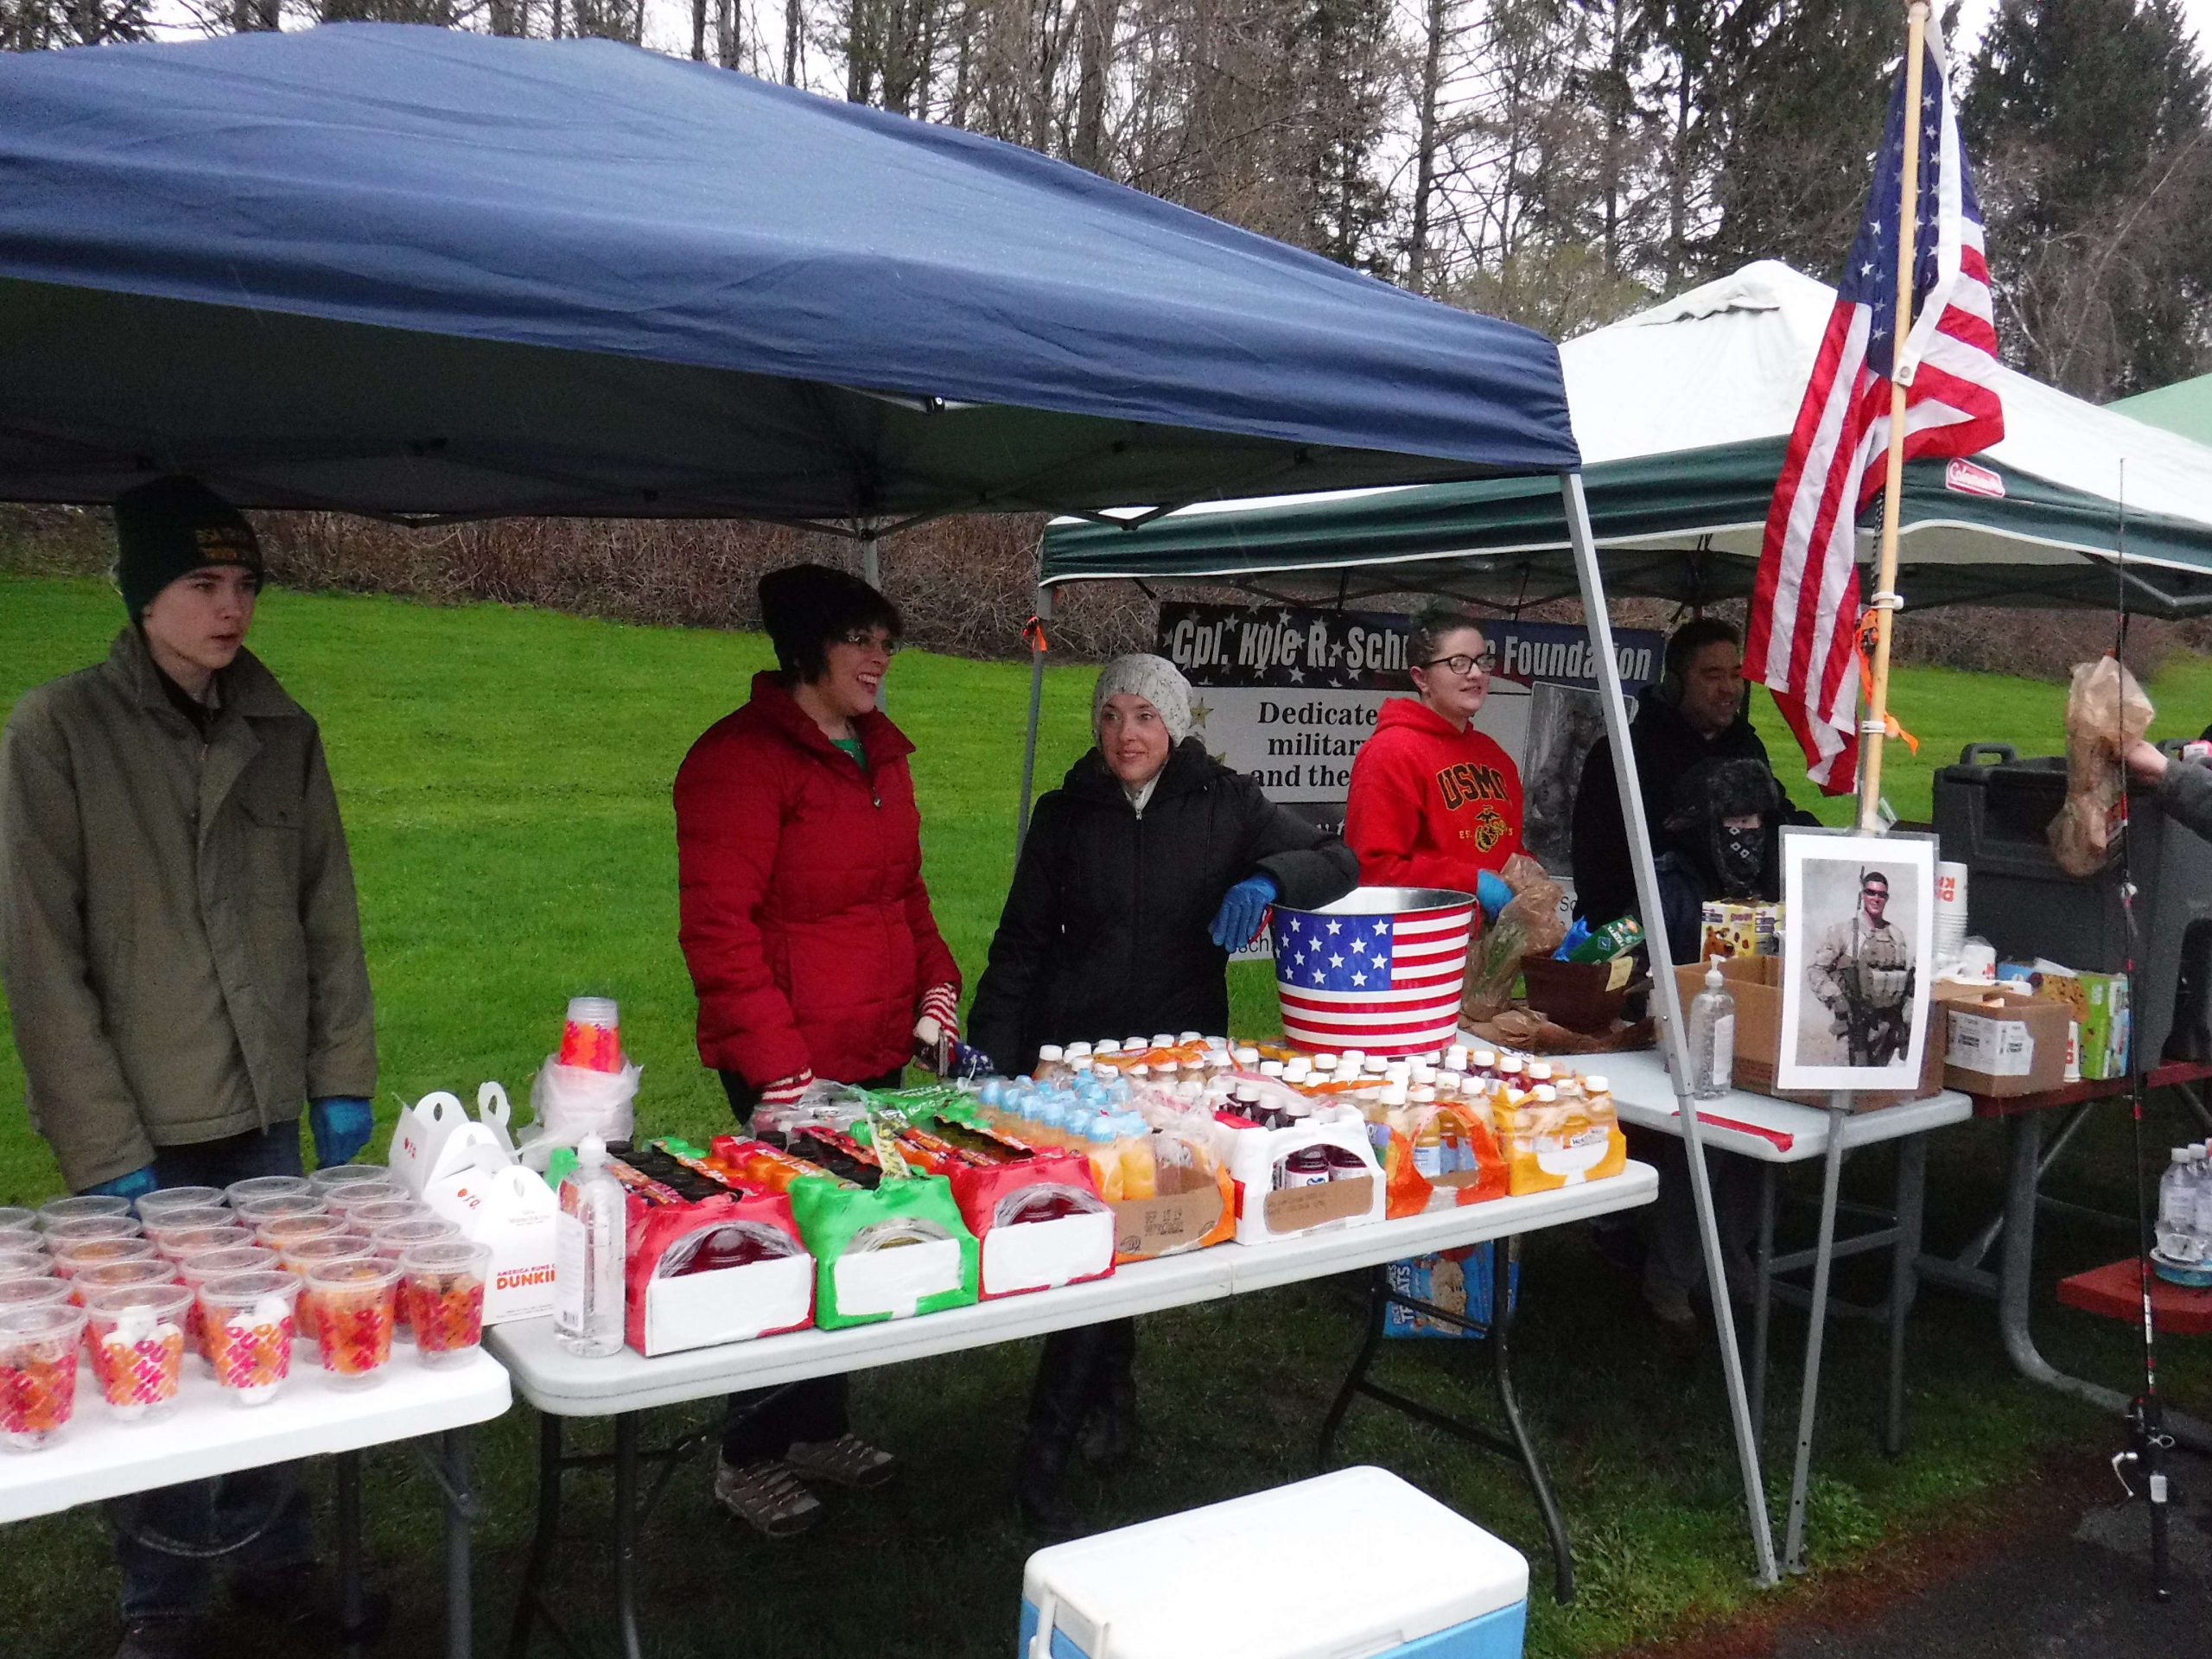 Snacks and coffee greeted the volunteers and soldiers.
